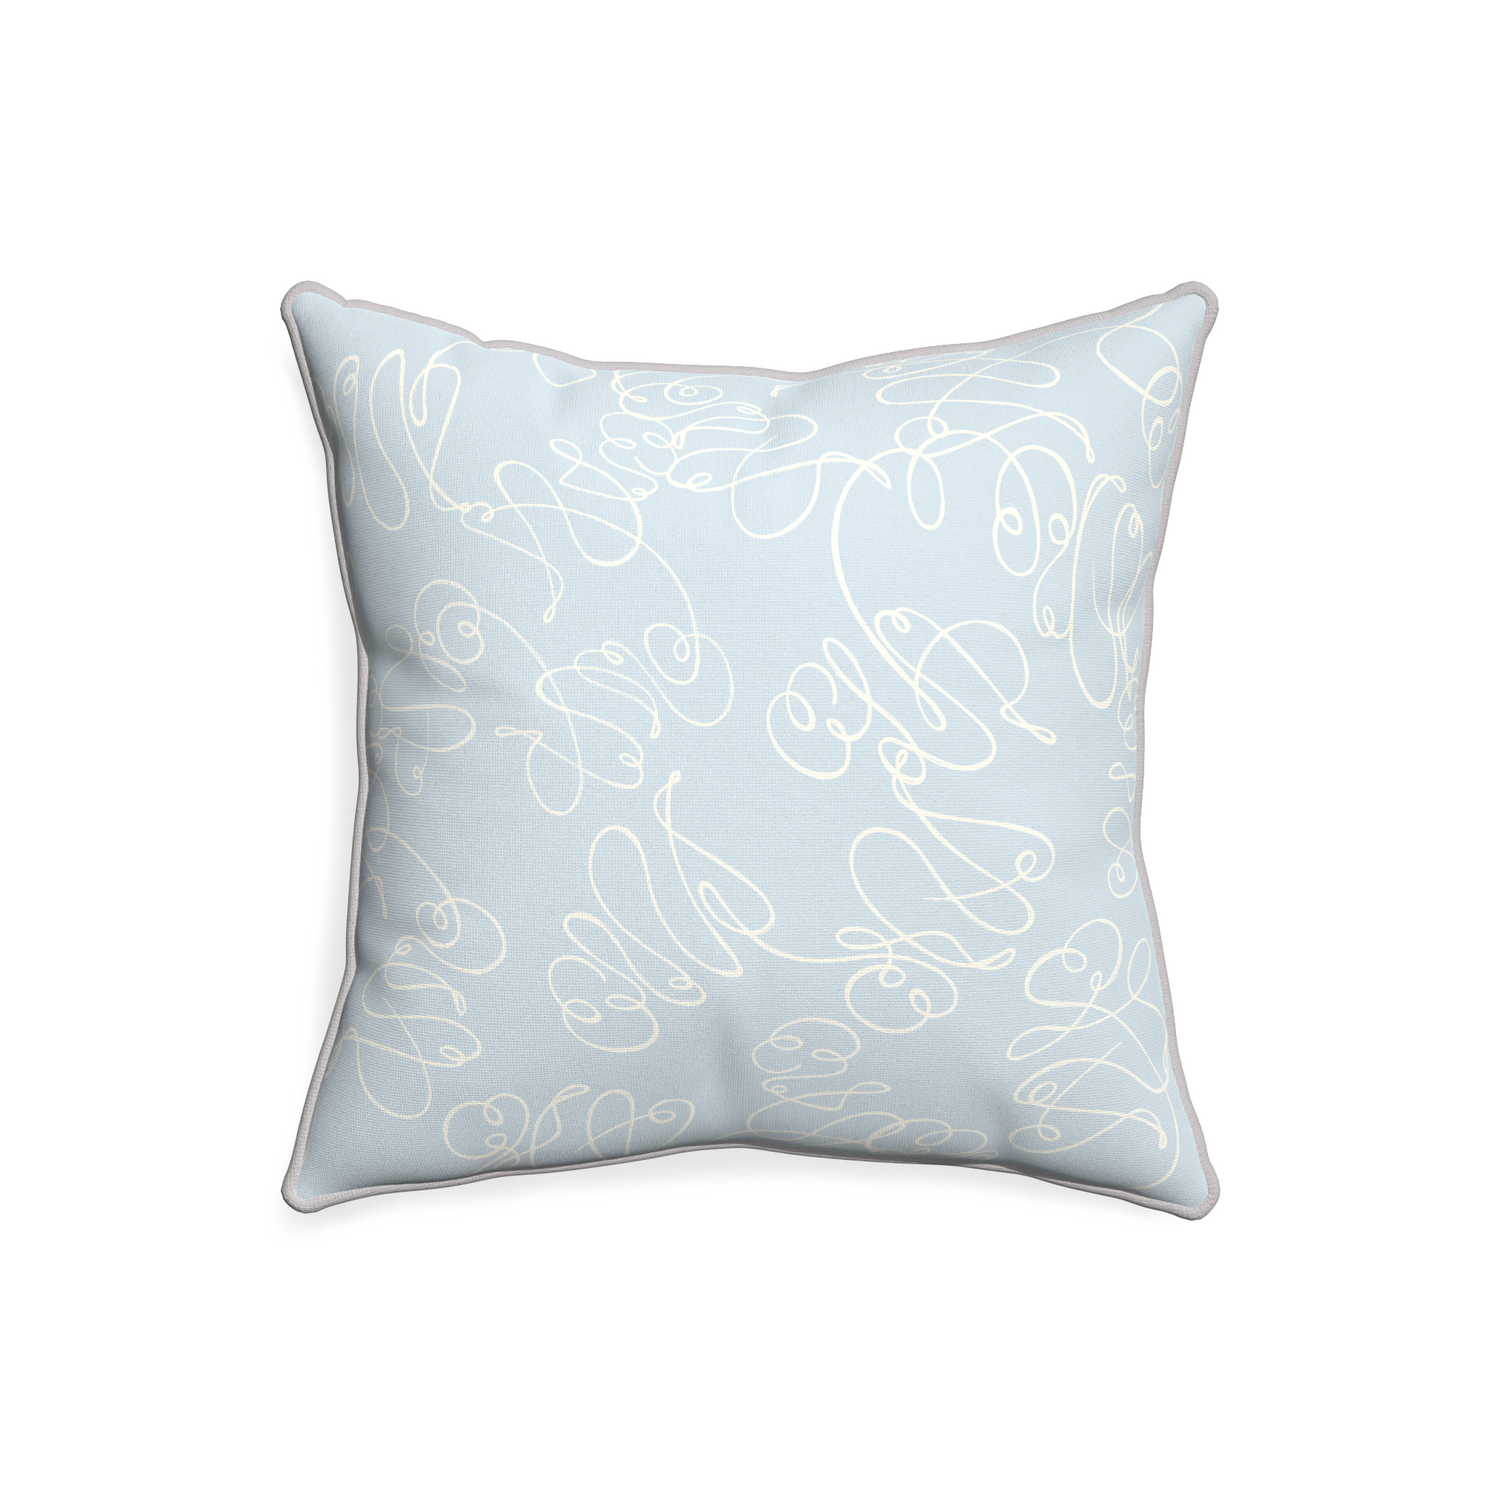 20-square mirabella custom powder blue abstractpillow with pebble piping on white background